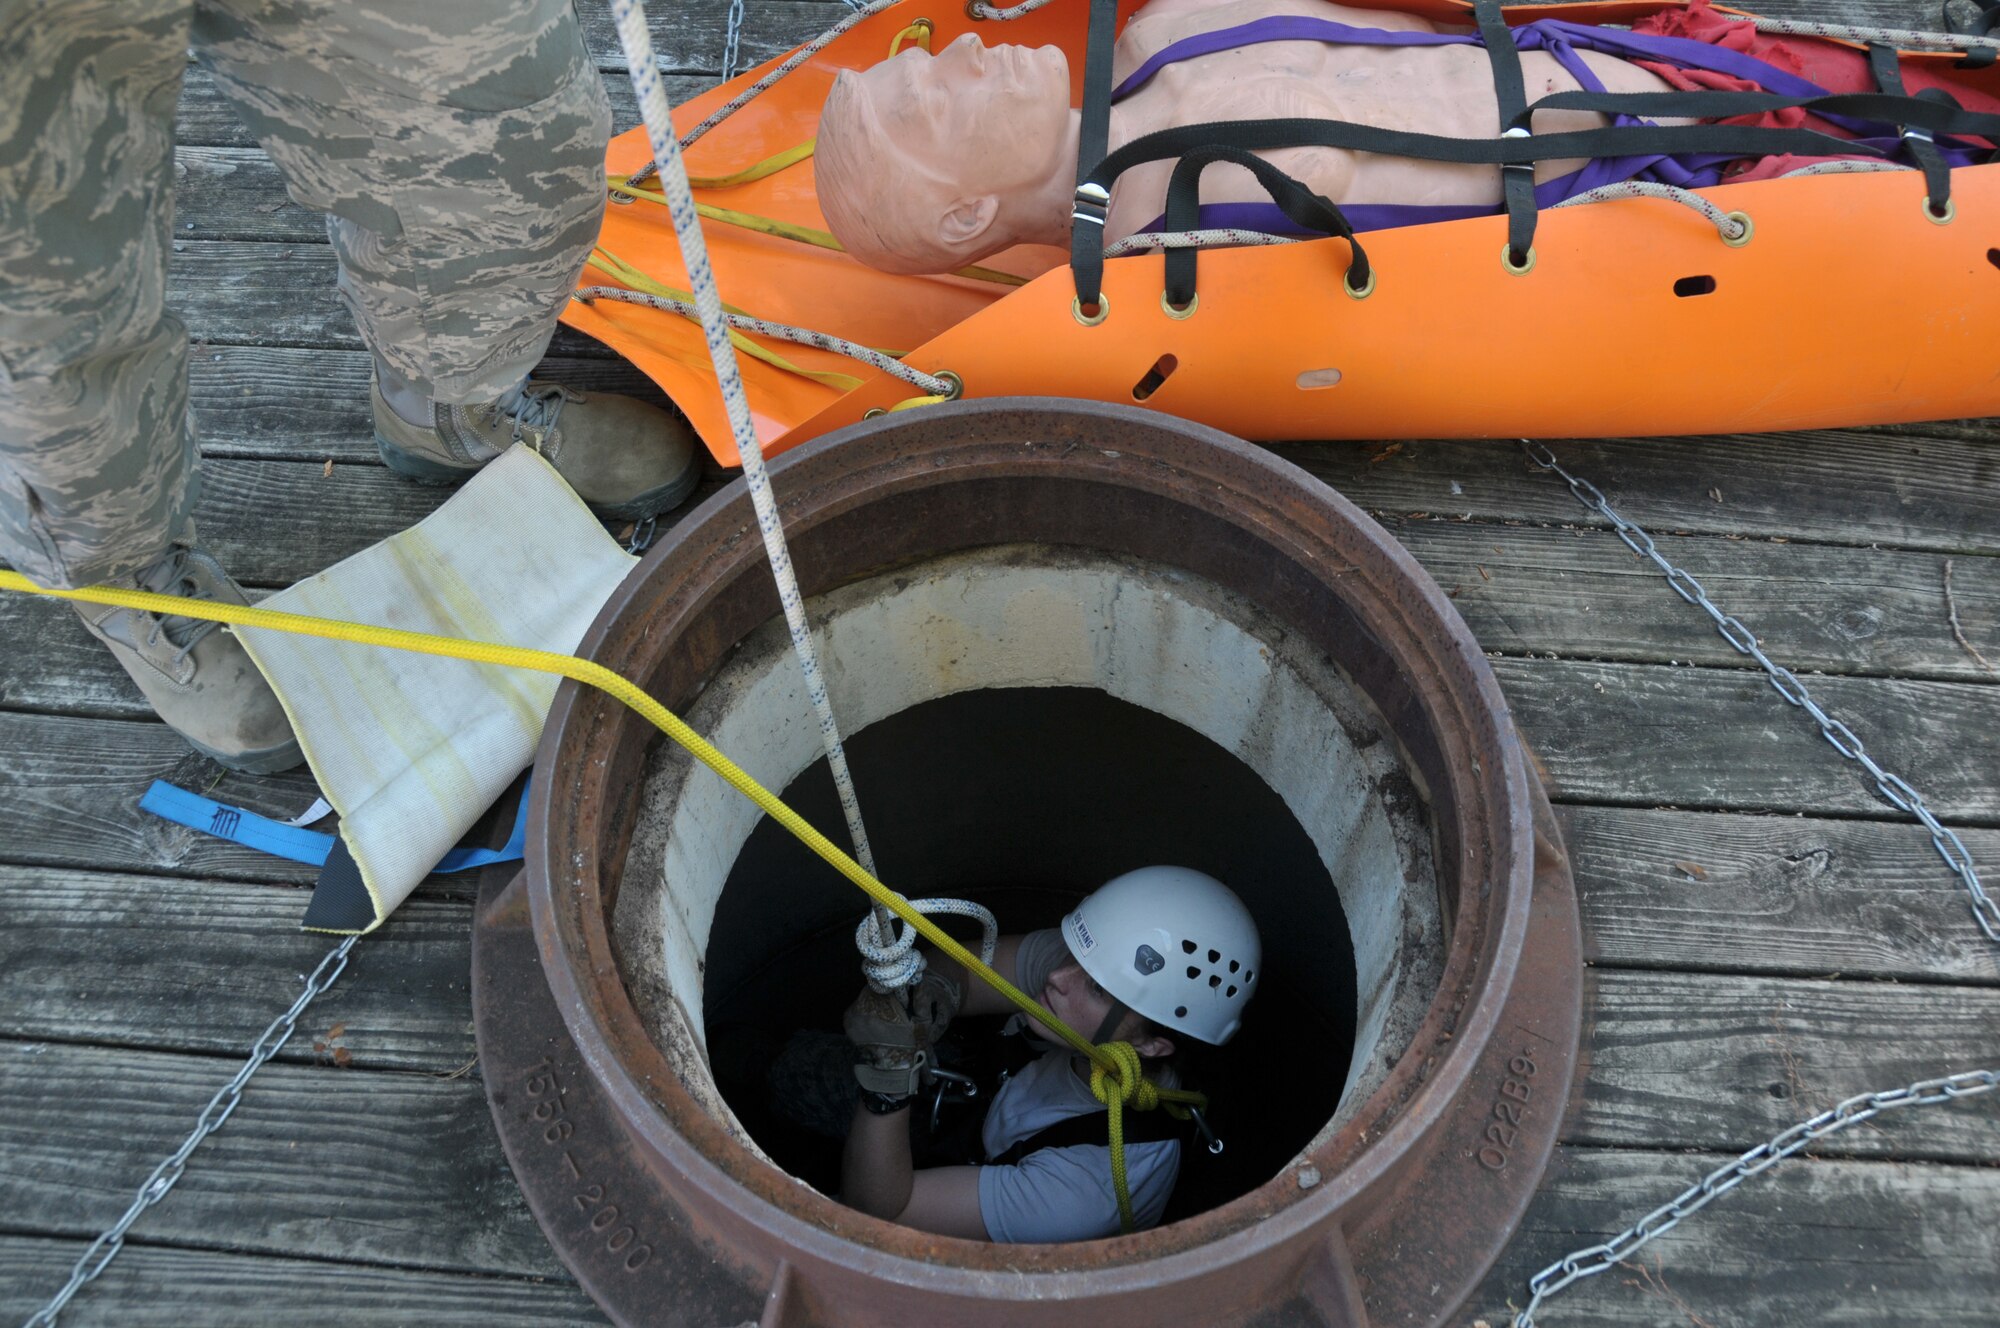 Staff Sgt. Jennifer Bristol participates in the 109th Fire Department's search and rescue team's confined space training at Stratton Air National Guard Base, New York, on Sept. 17, 2015. The 12-person search and rescue team trains monthly on various rescue techniques. (U.S. Air National Guard photo by Tech. Sgt. Catharine Schmidt/Released)